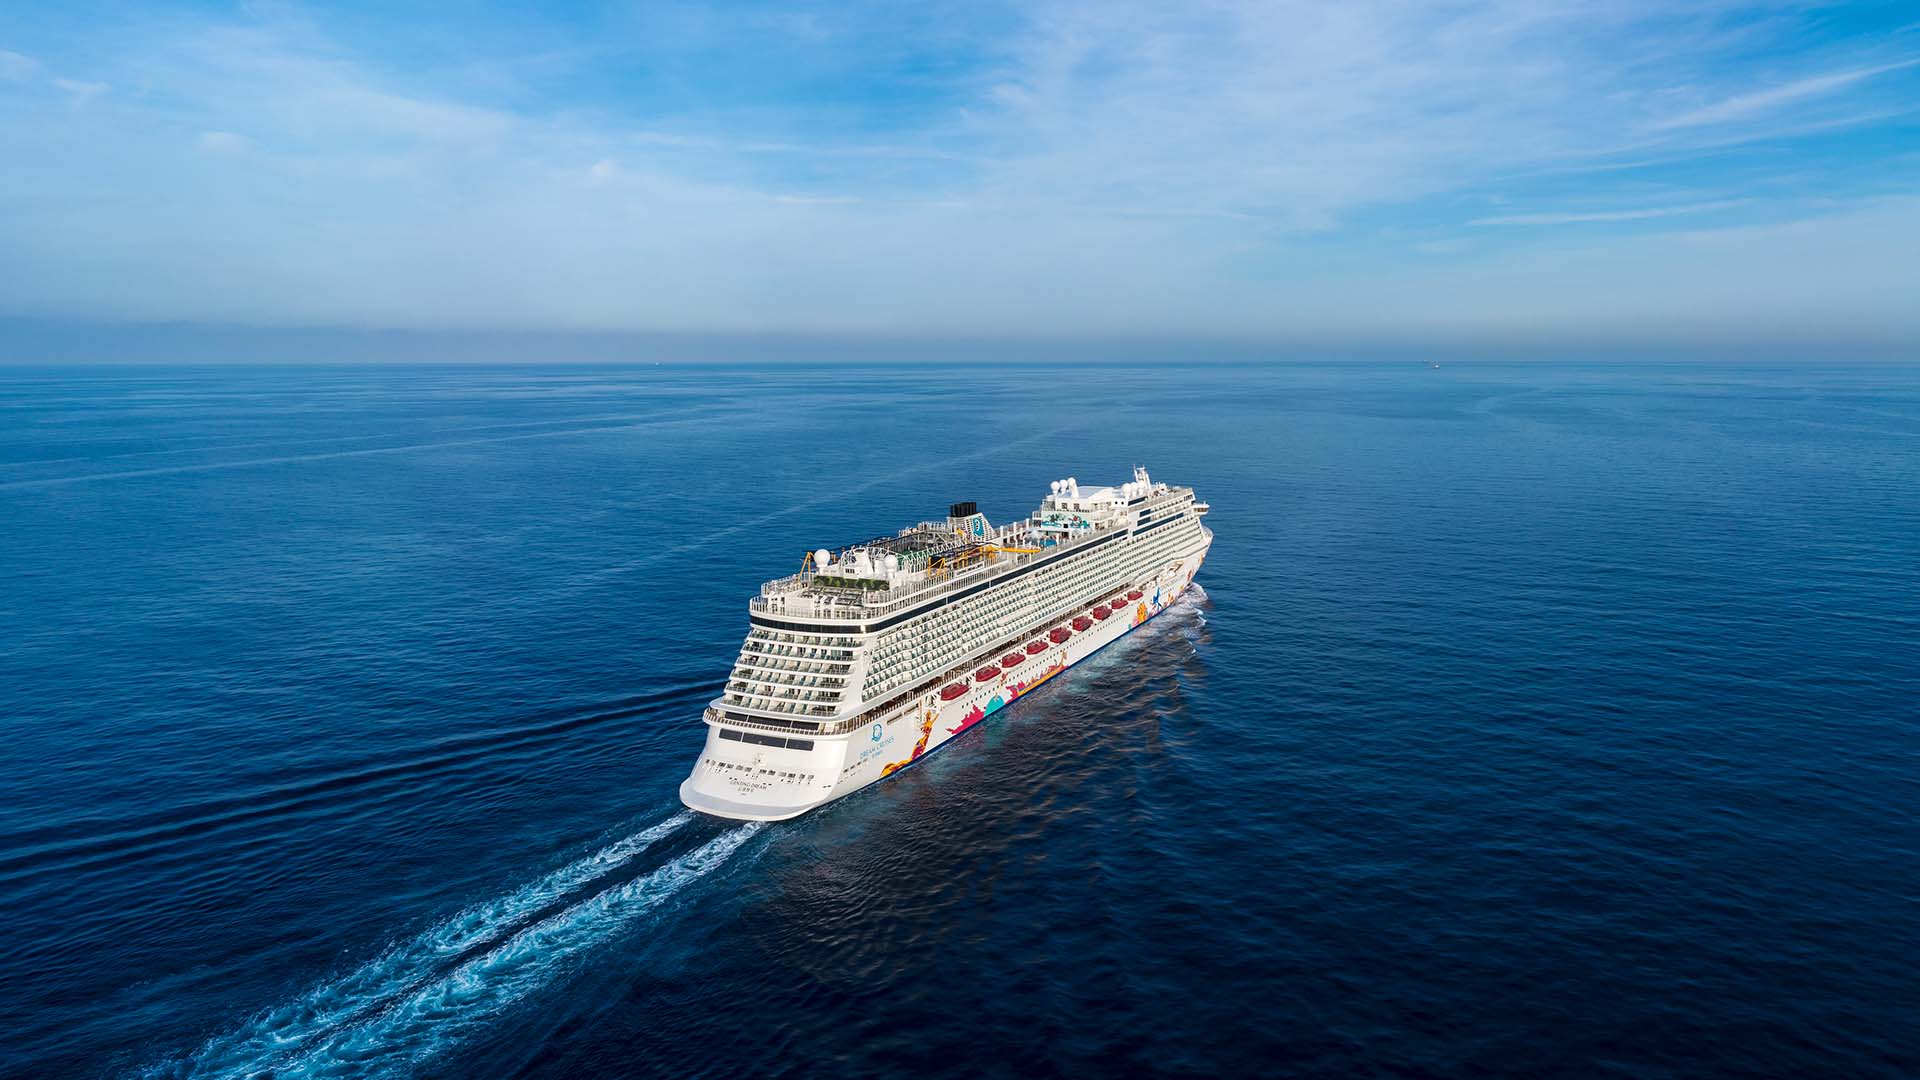 Genting Dream — relax in luxury at sea